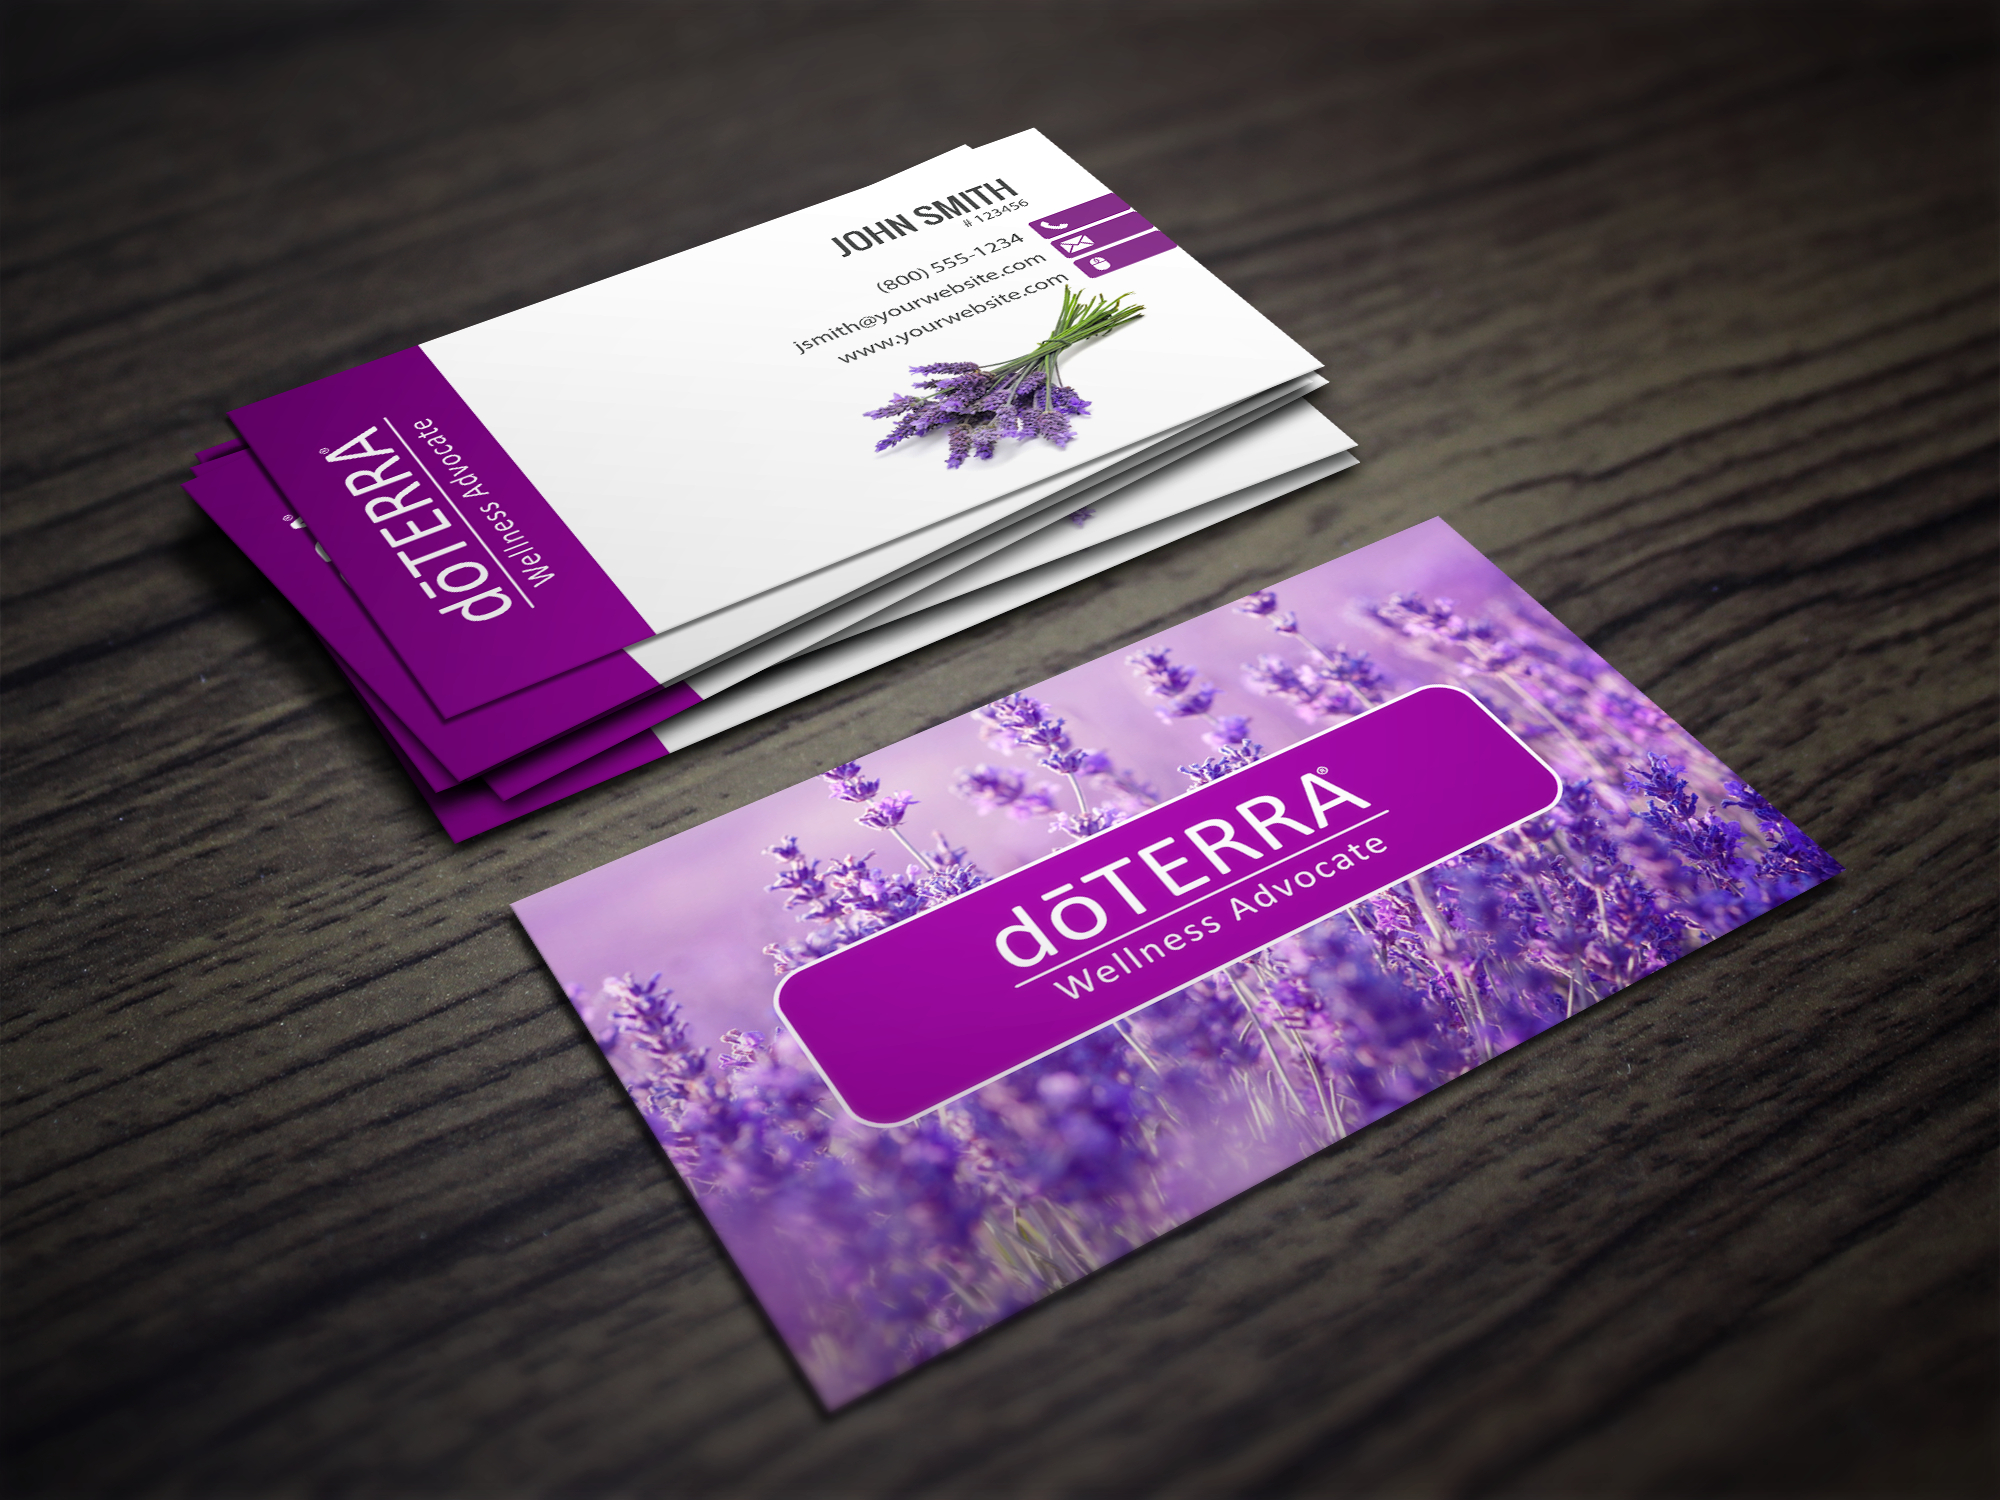 Doterra Business Cards With A Lavendar Field In The Background - Free Printable Doterra Sample Cards